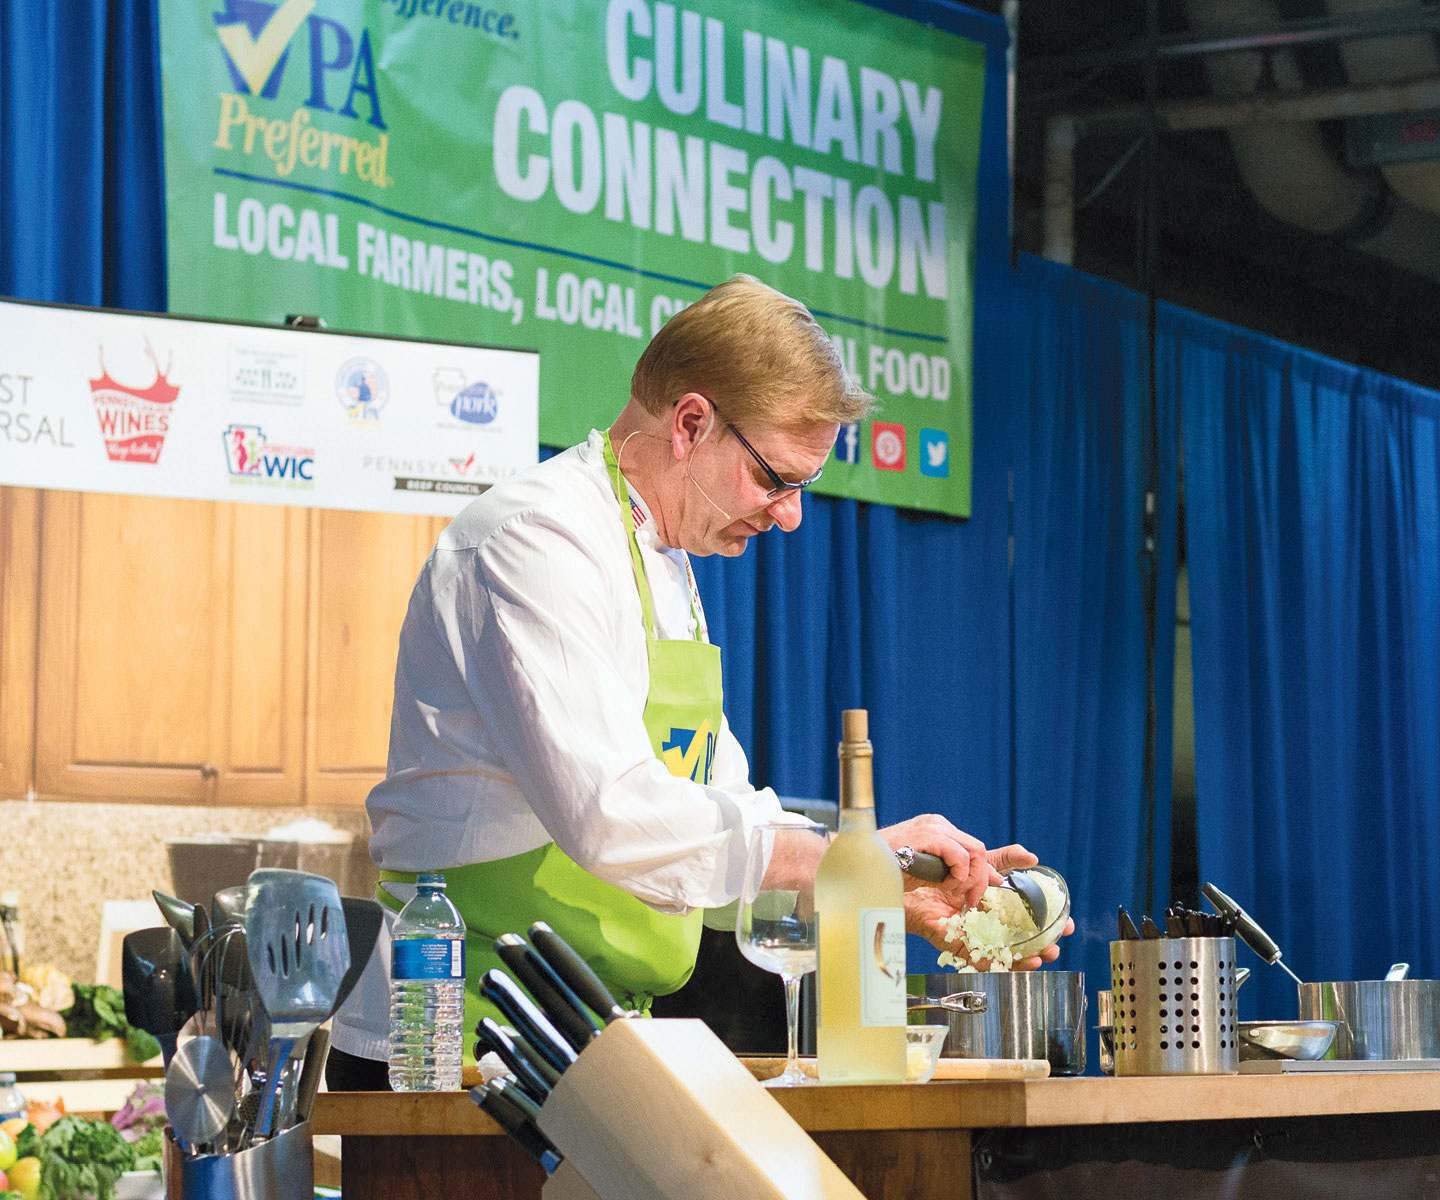 White House chef John Moeller on the Culinary Connections Stage